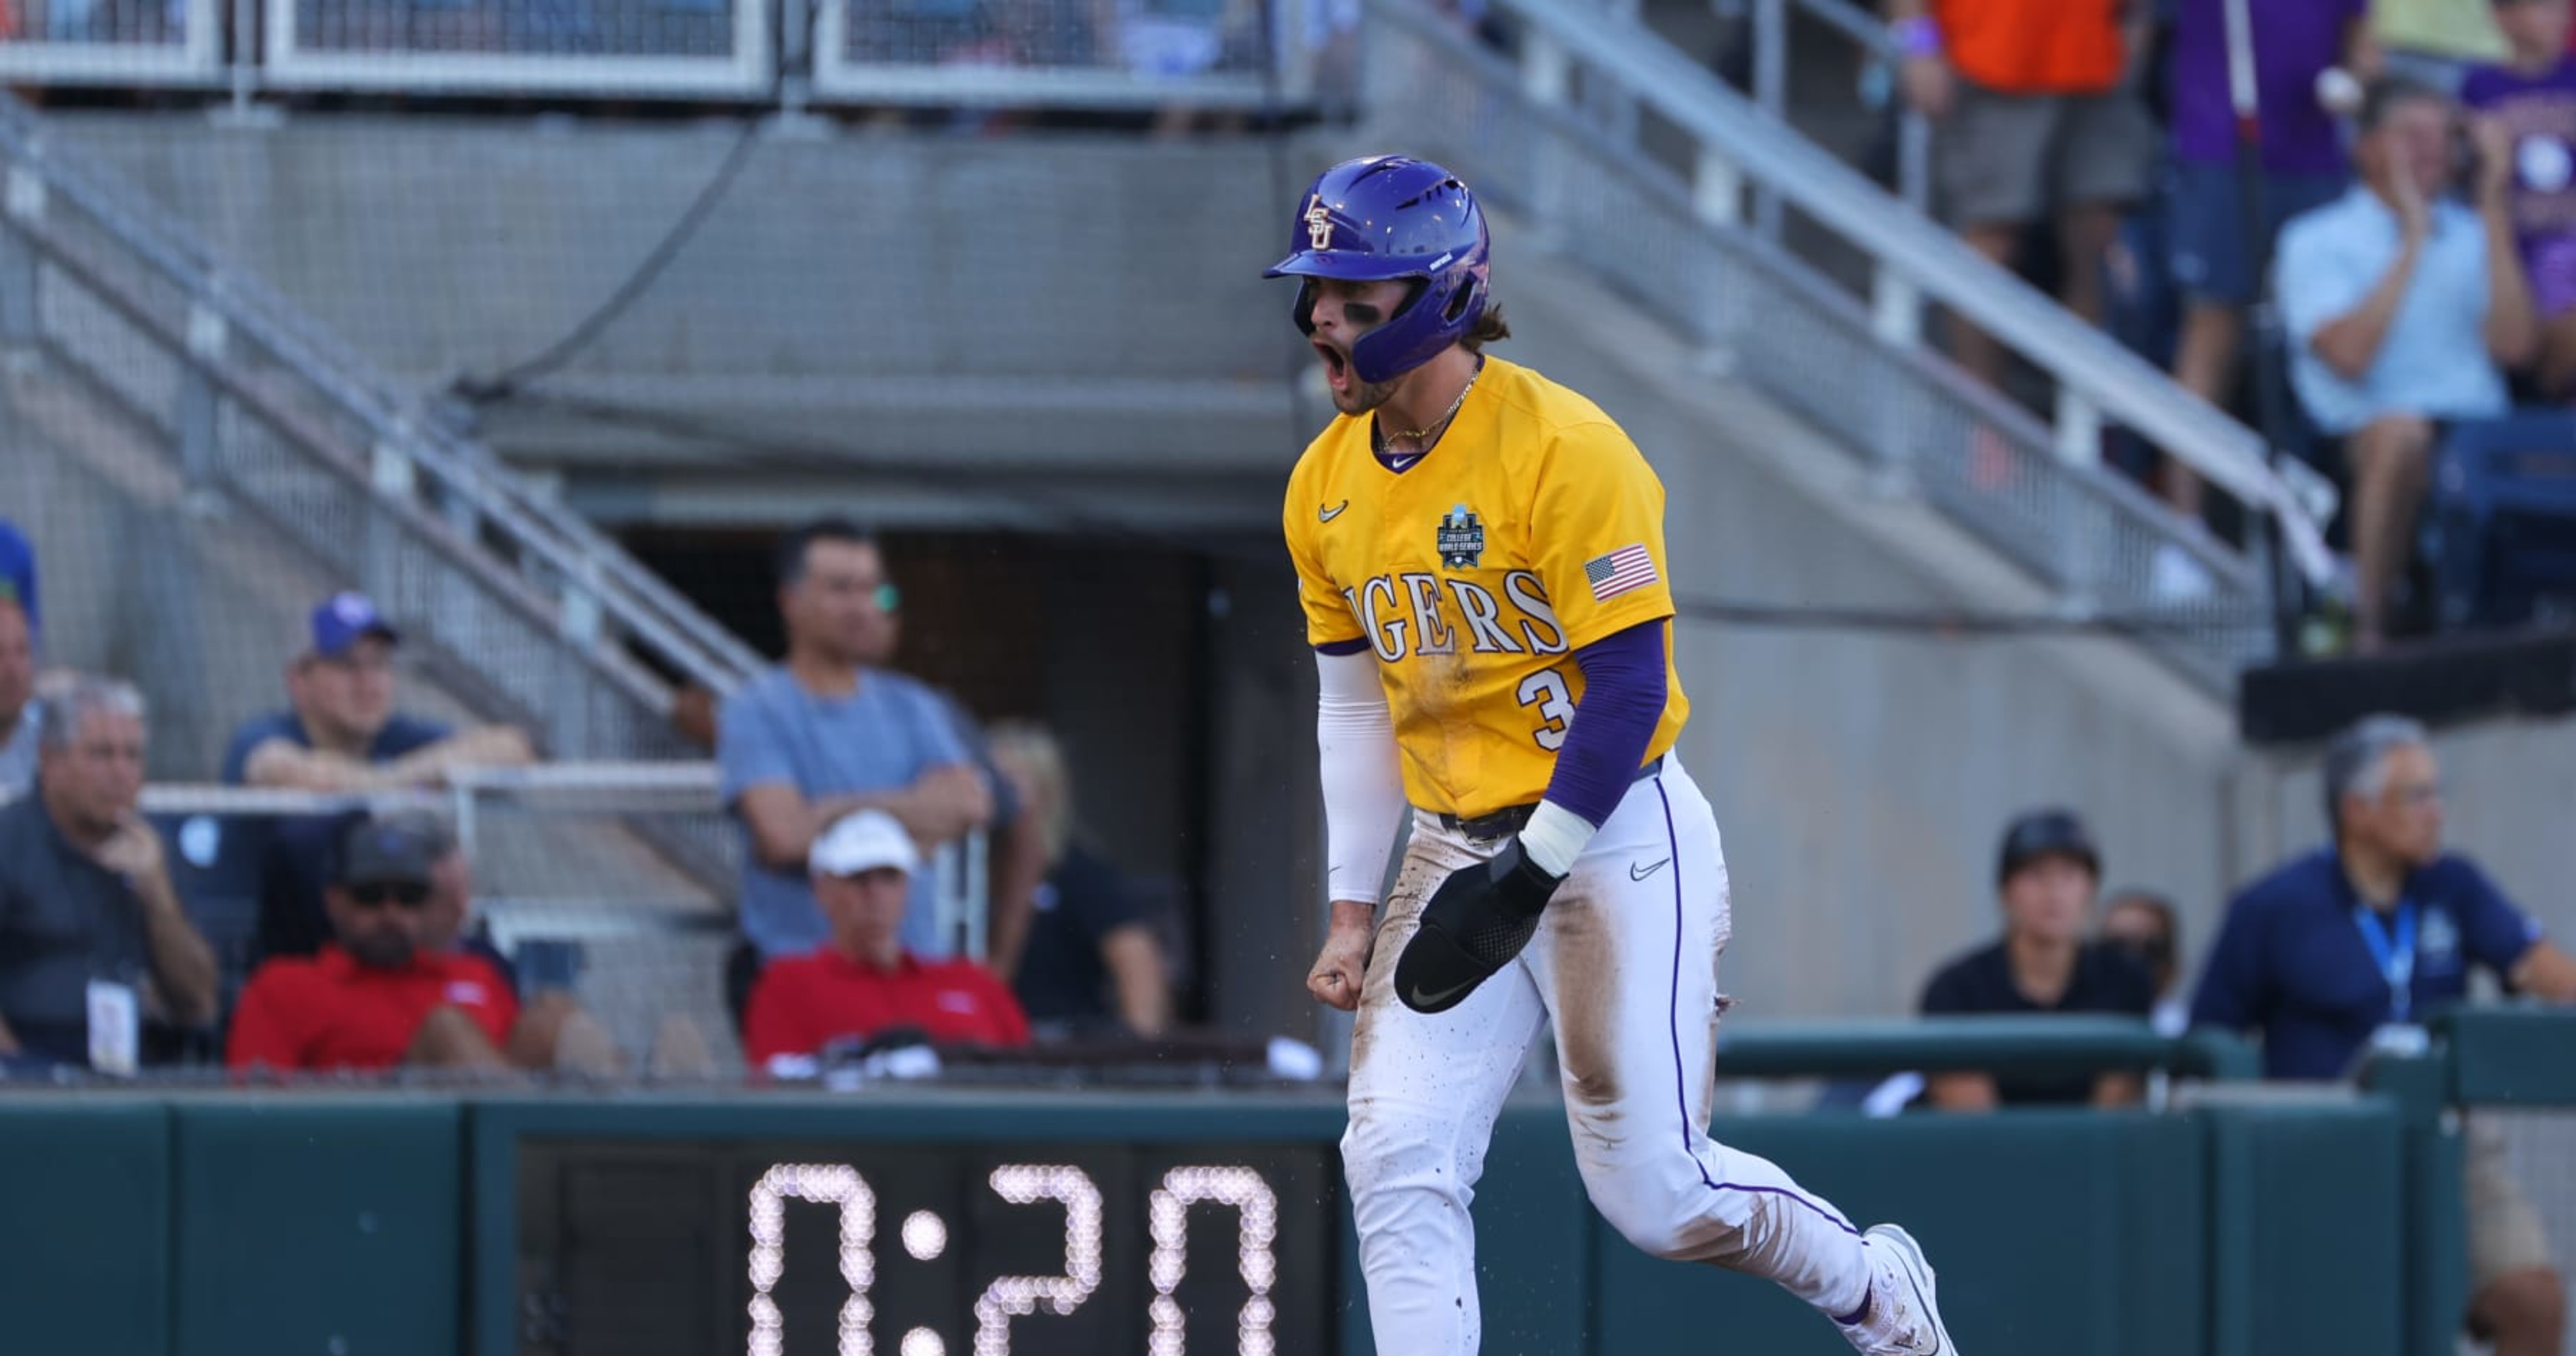 LSU in MLB: Watch Dylan Crews hit first professional home run